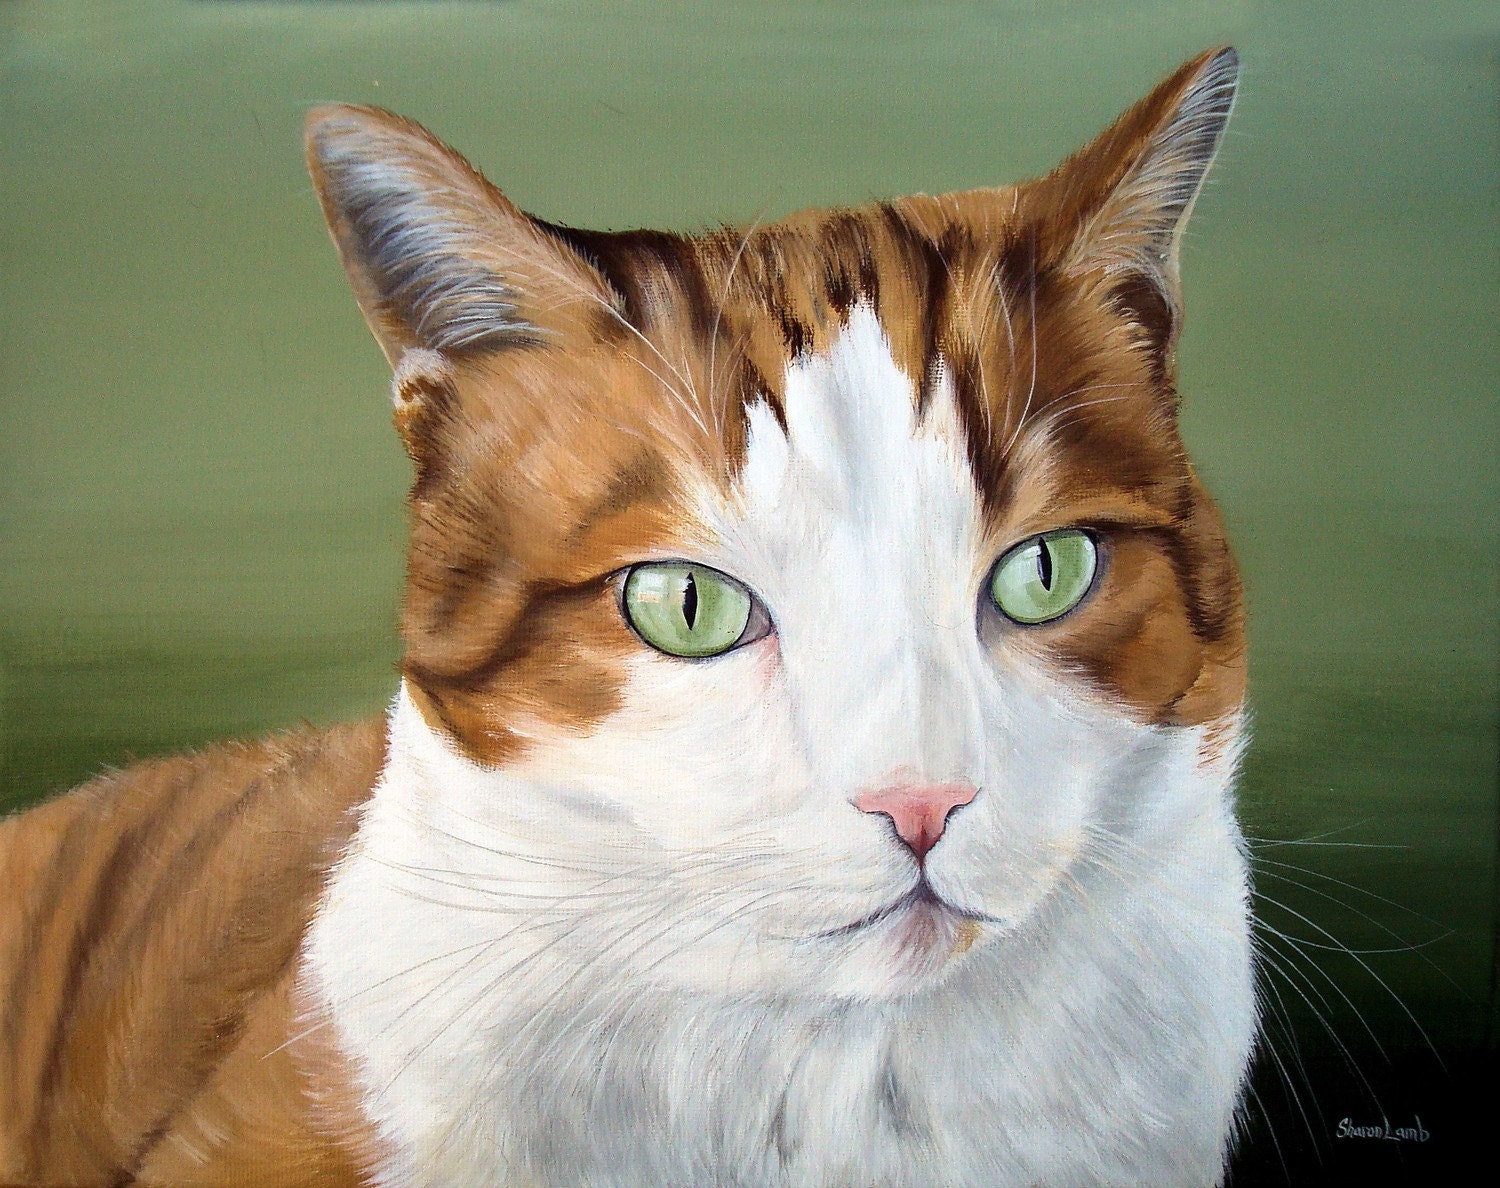 Commissioned Pet Portrait Painting11x14 Hand Painted Your Pet any Animal Dog Cat or Horse